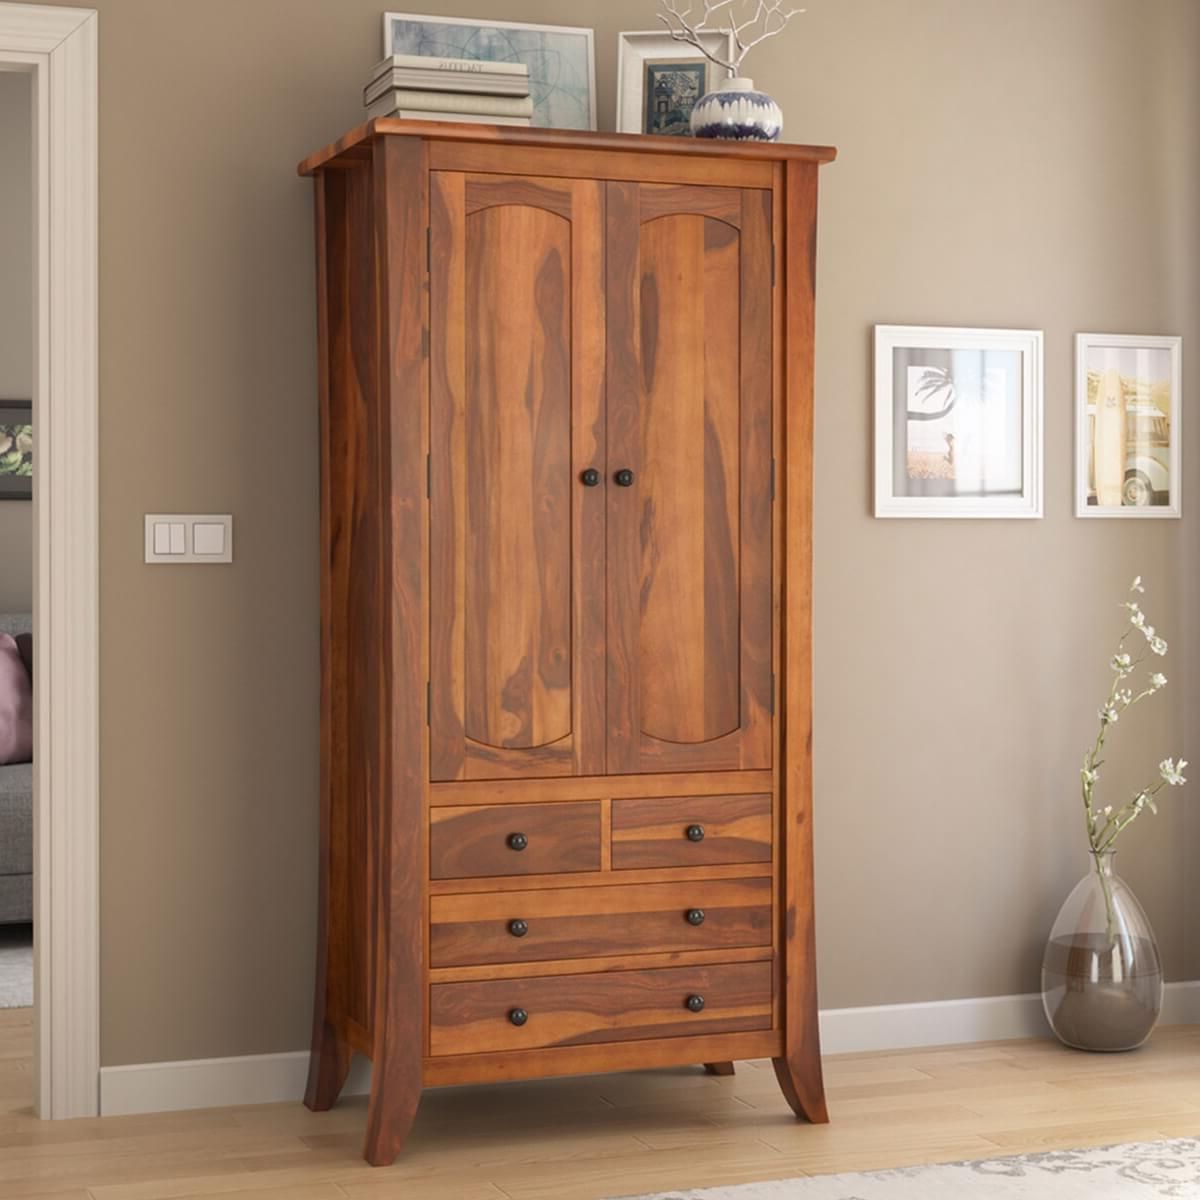 Georgia Rustic Solid Wood Wardrobe Armoire Closet With 4 Drawers Within Cheap Solid Wood Wardrobes (Gallery 10 of 20)